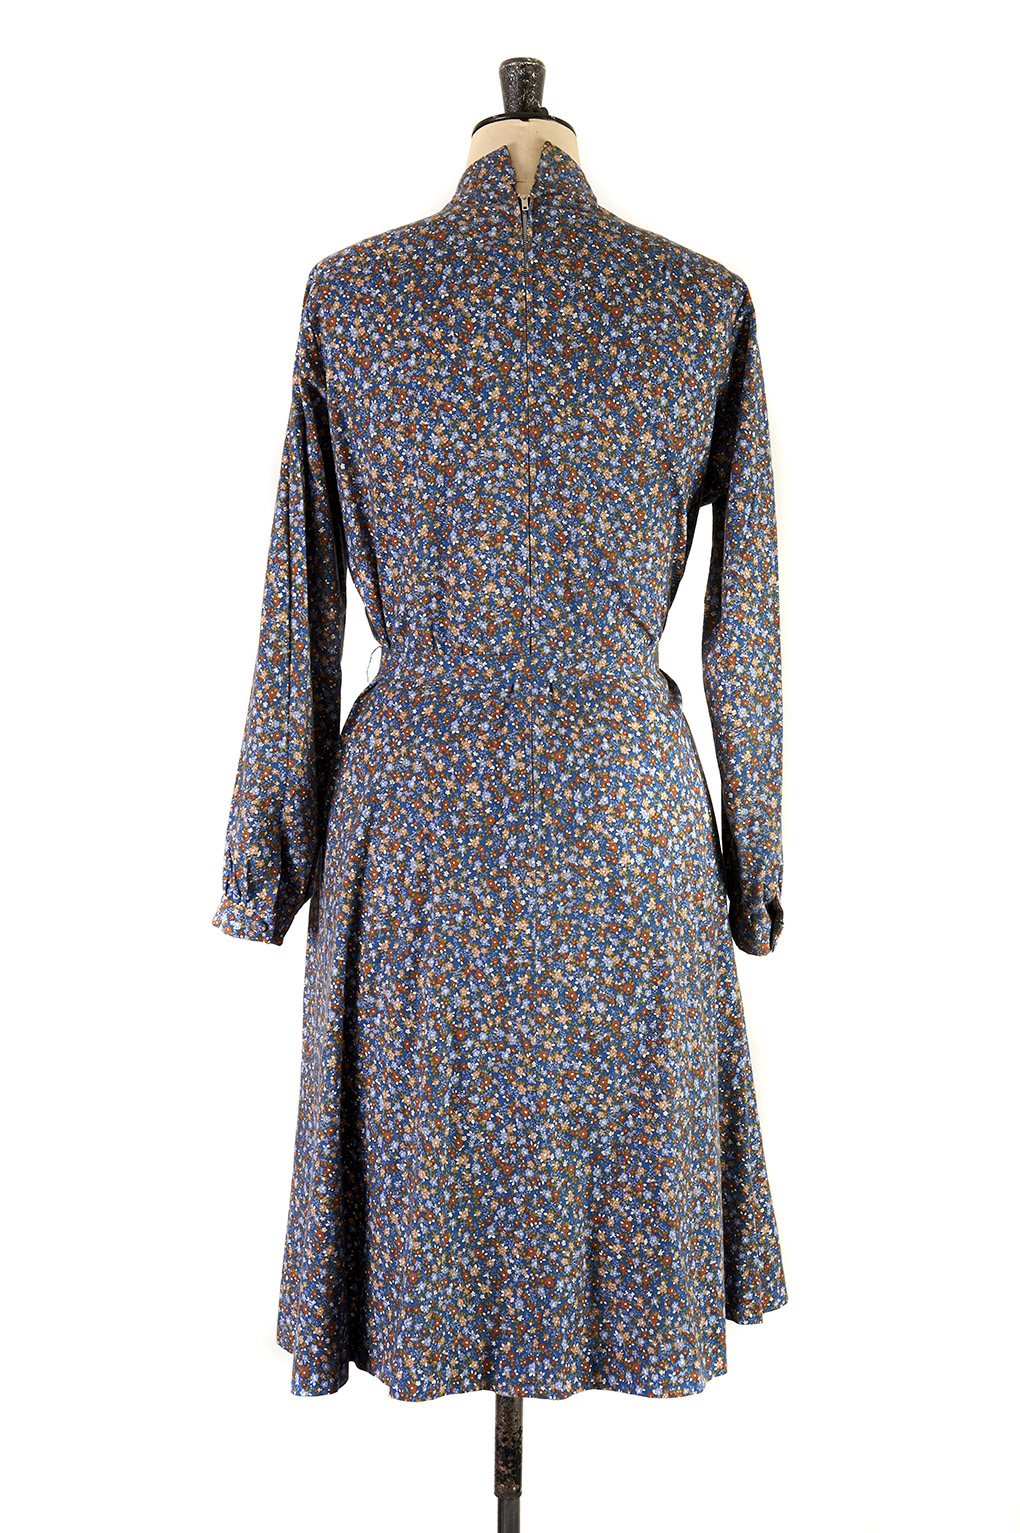 Warm Floral Dress by Margot and Hesse